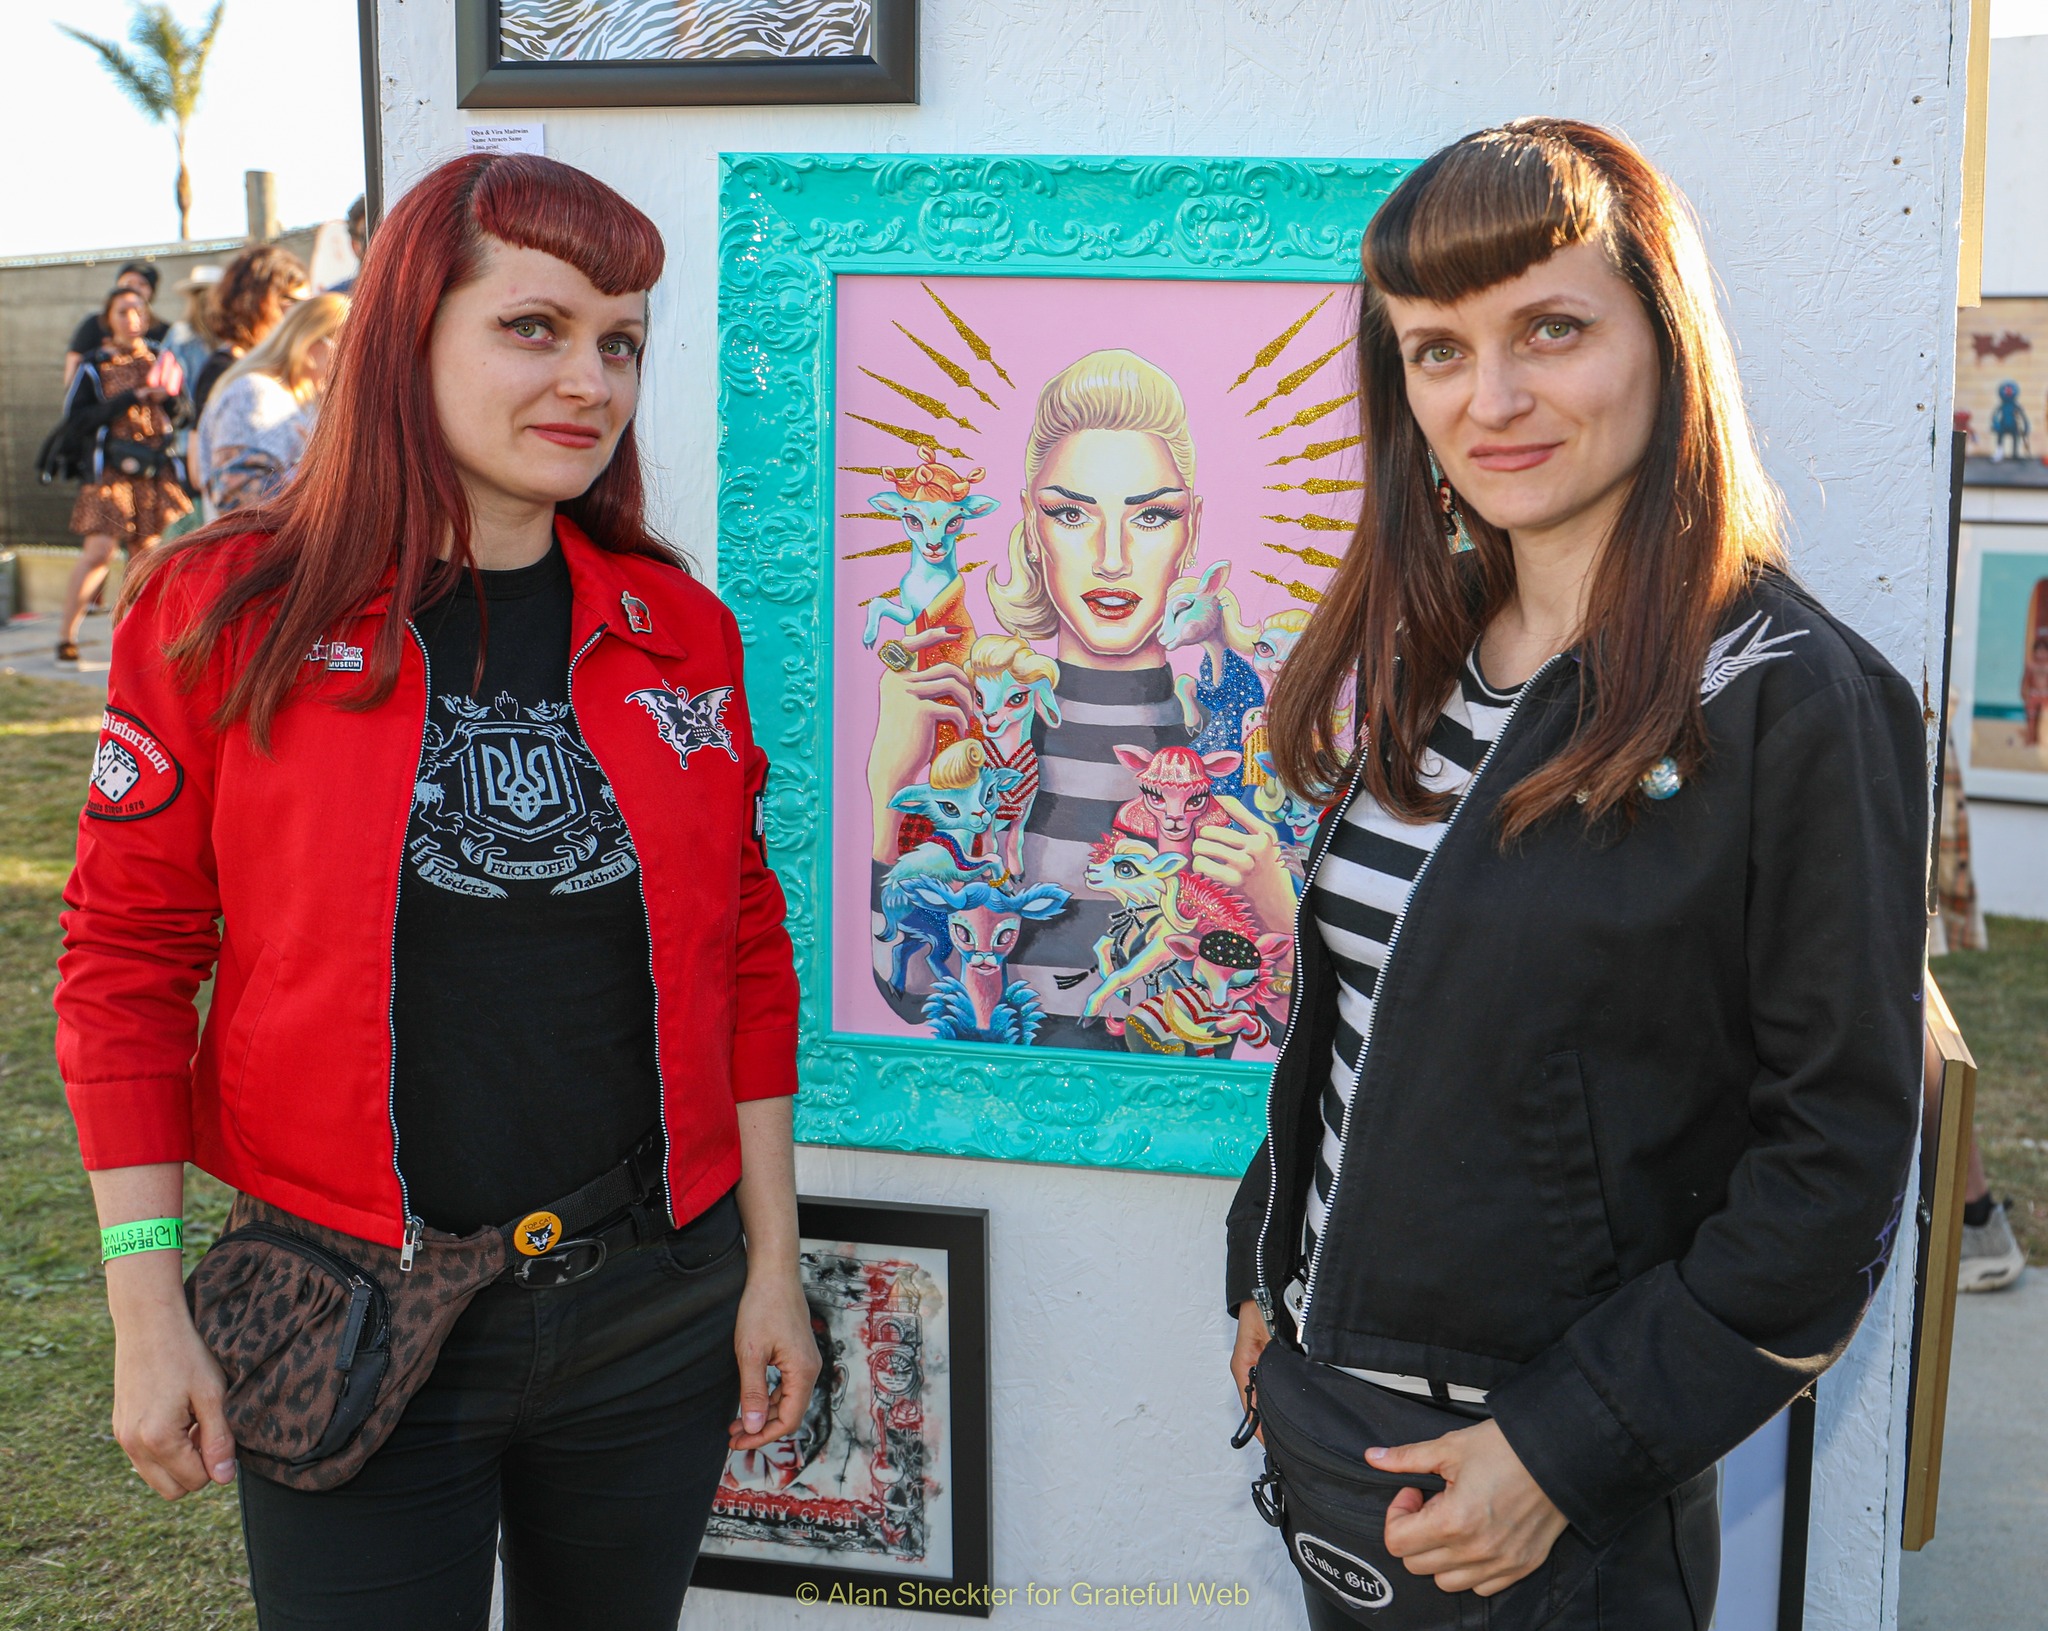 The Mad Twins – Olya and Vira – pose with a piece of their art depicting Gwen Stefani